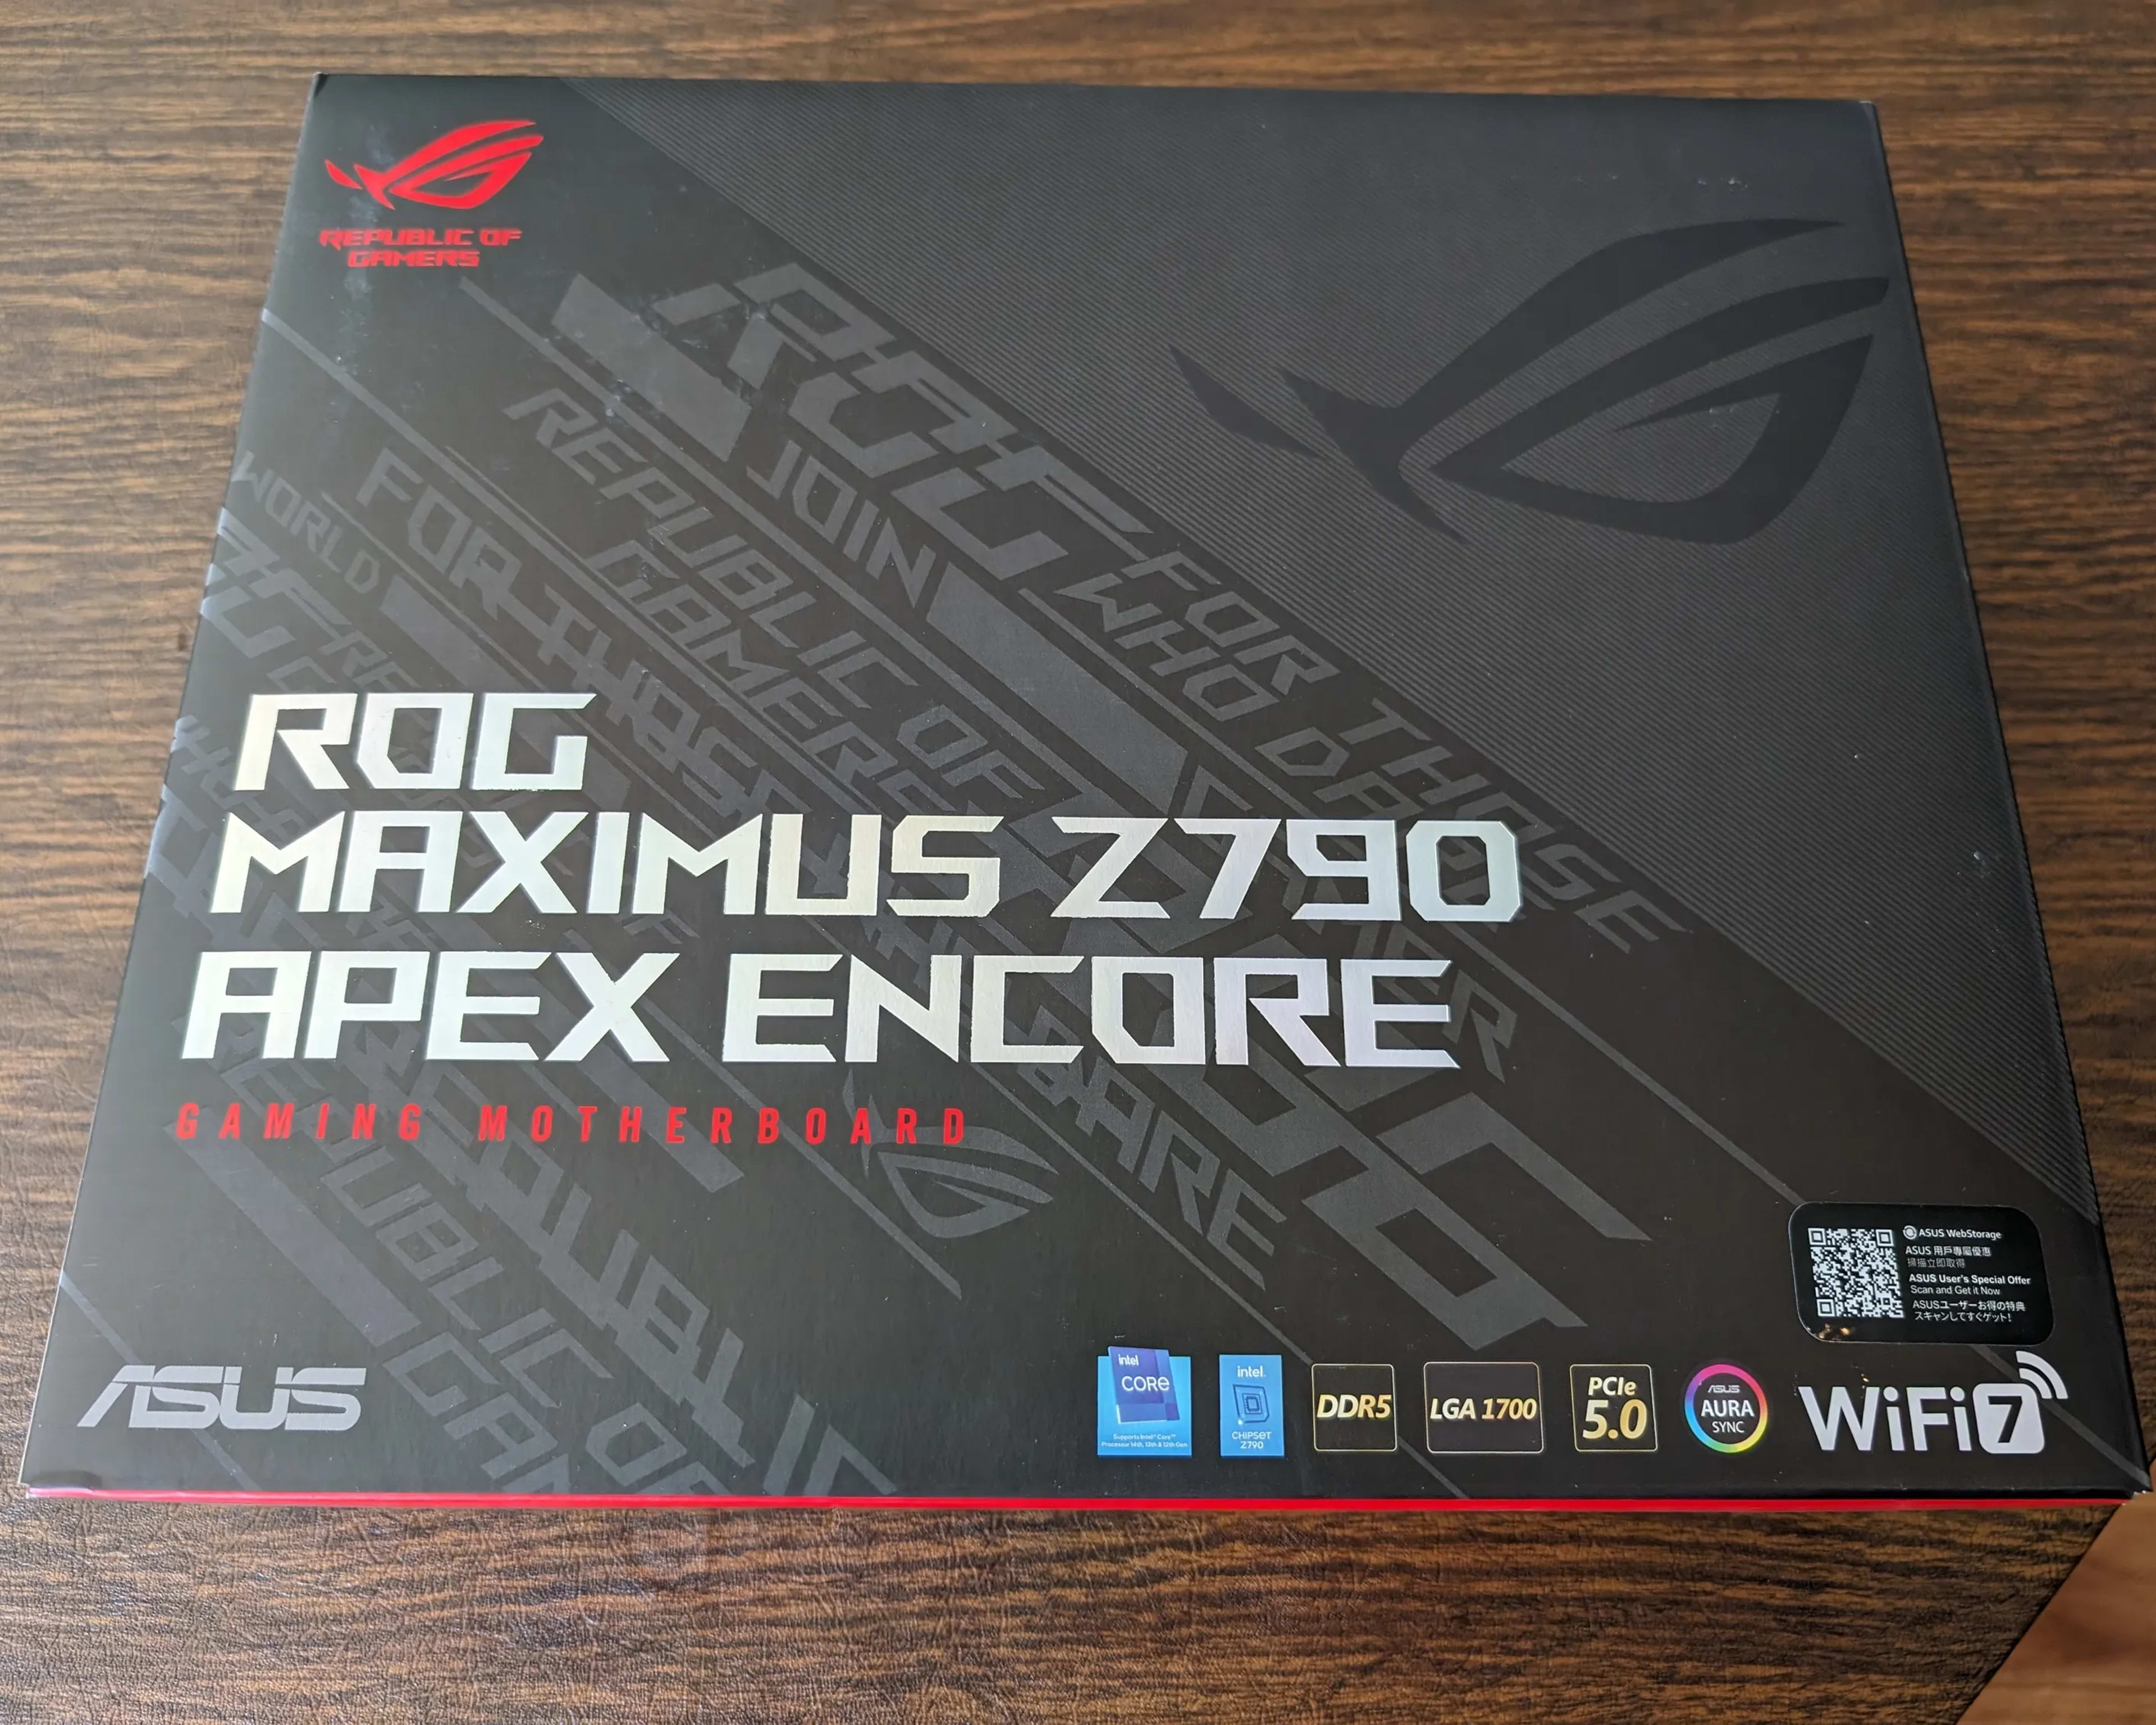 ASUS ROG MAXIMUS Z790 APEX ENCORE Motherboard - BRAND NEW/SEALED